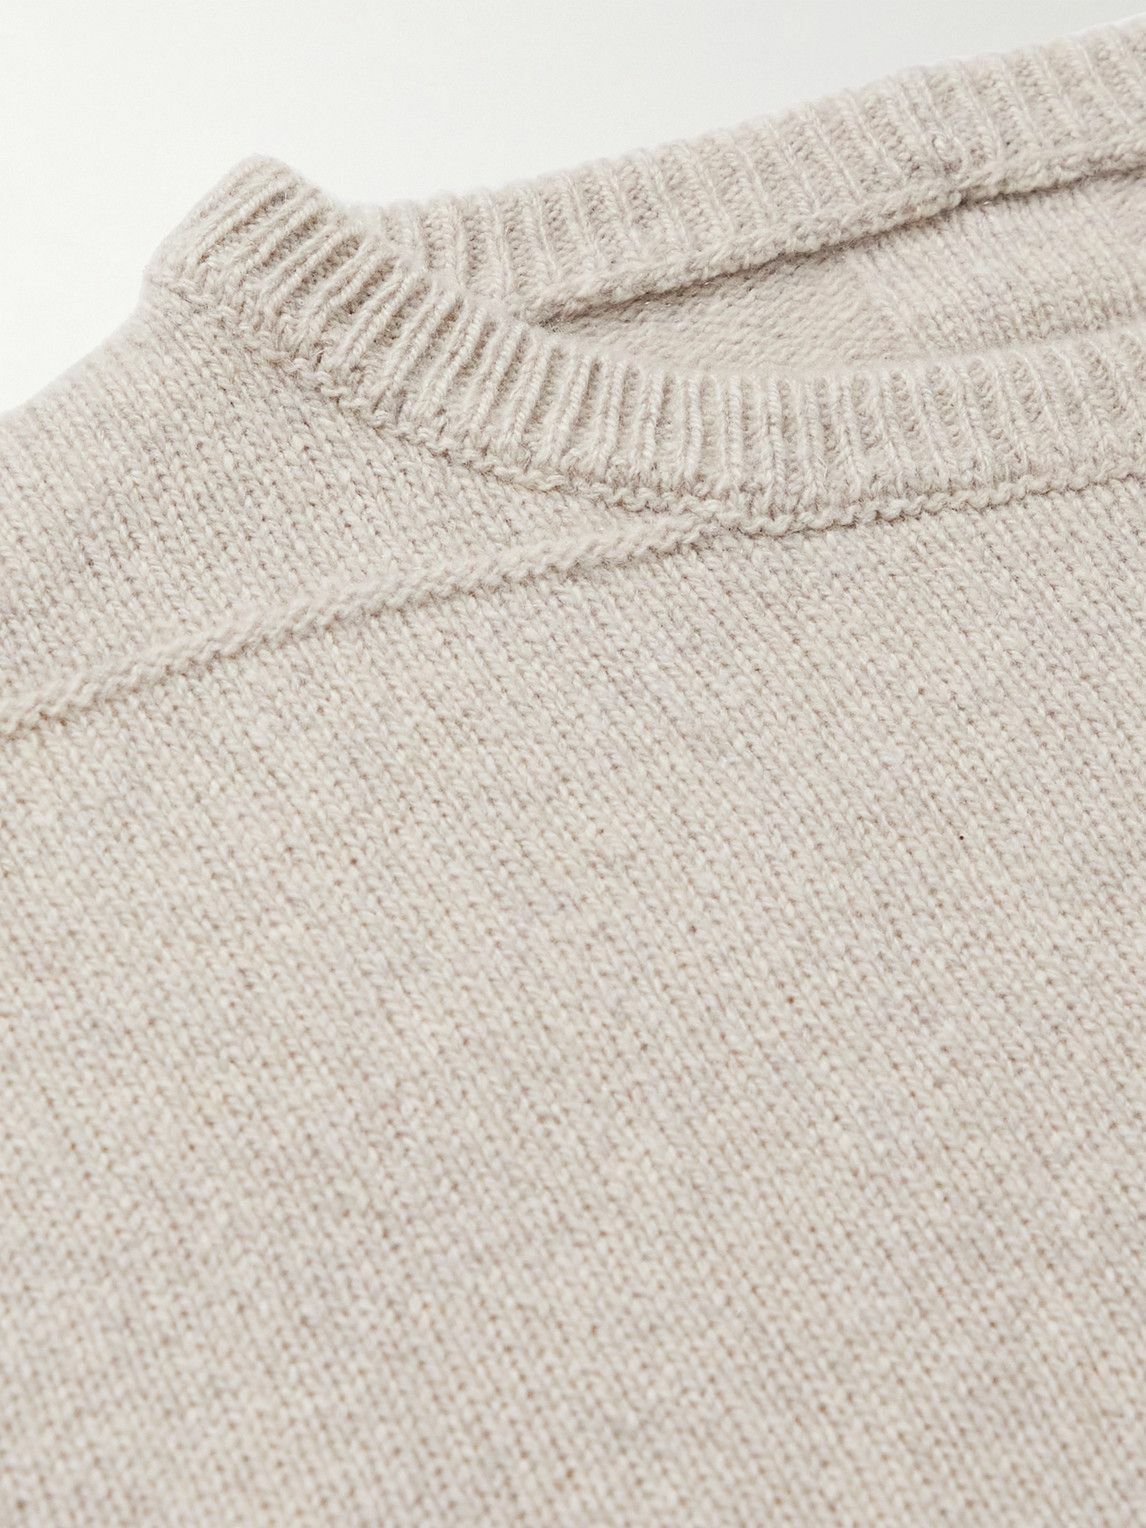 Rick Owens - Recycled Cashmere and Wool-Blend Sweater - Neutrals